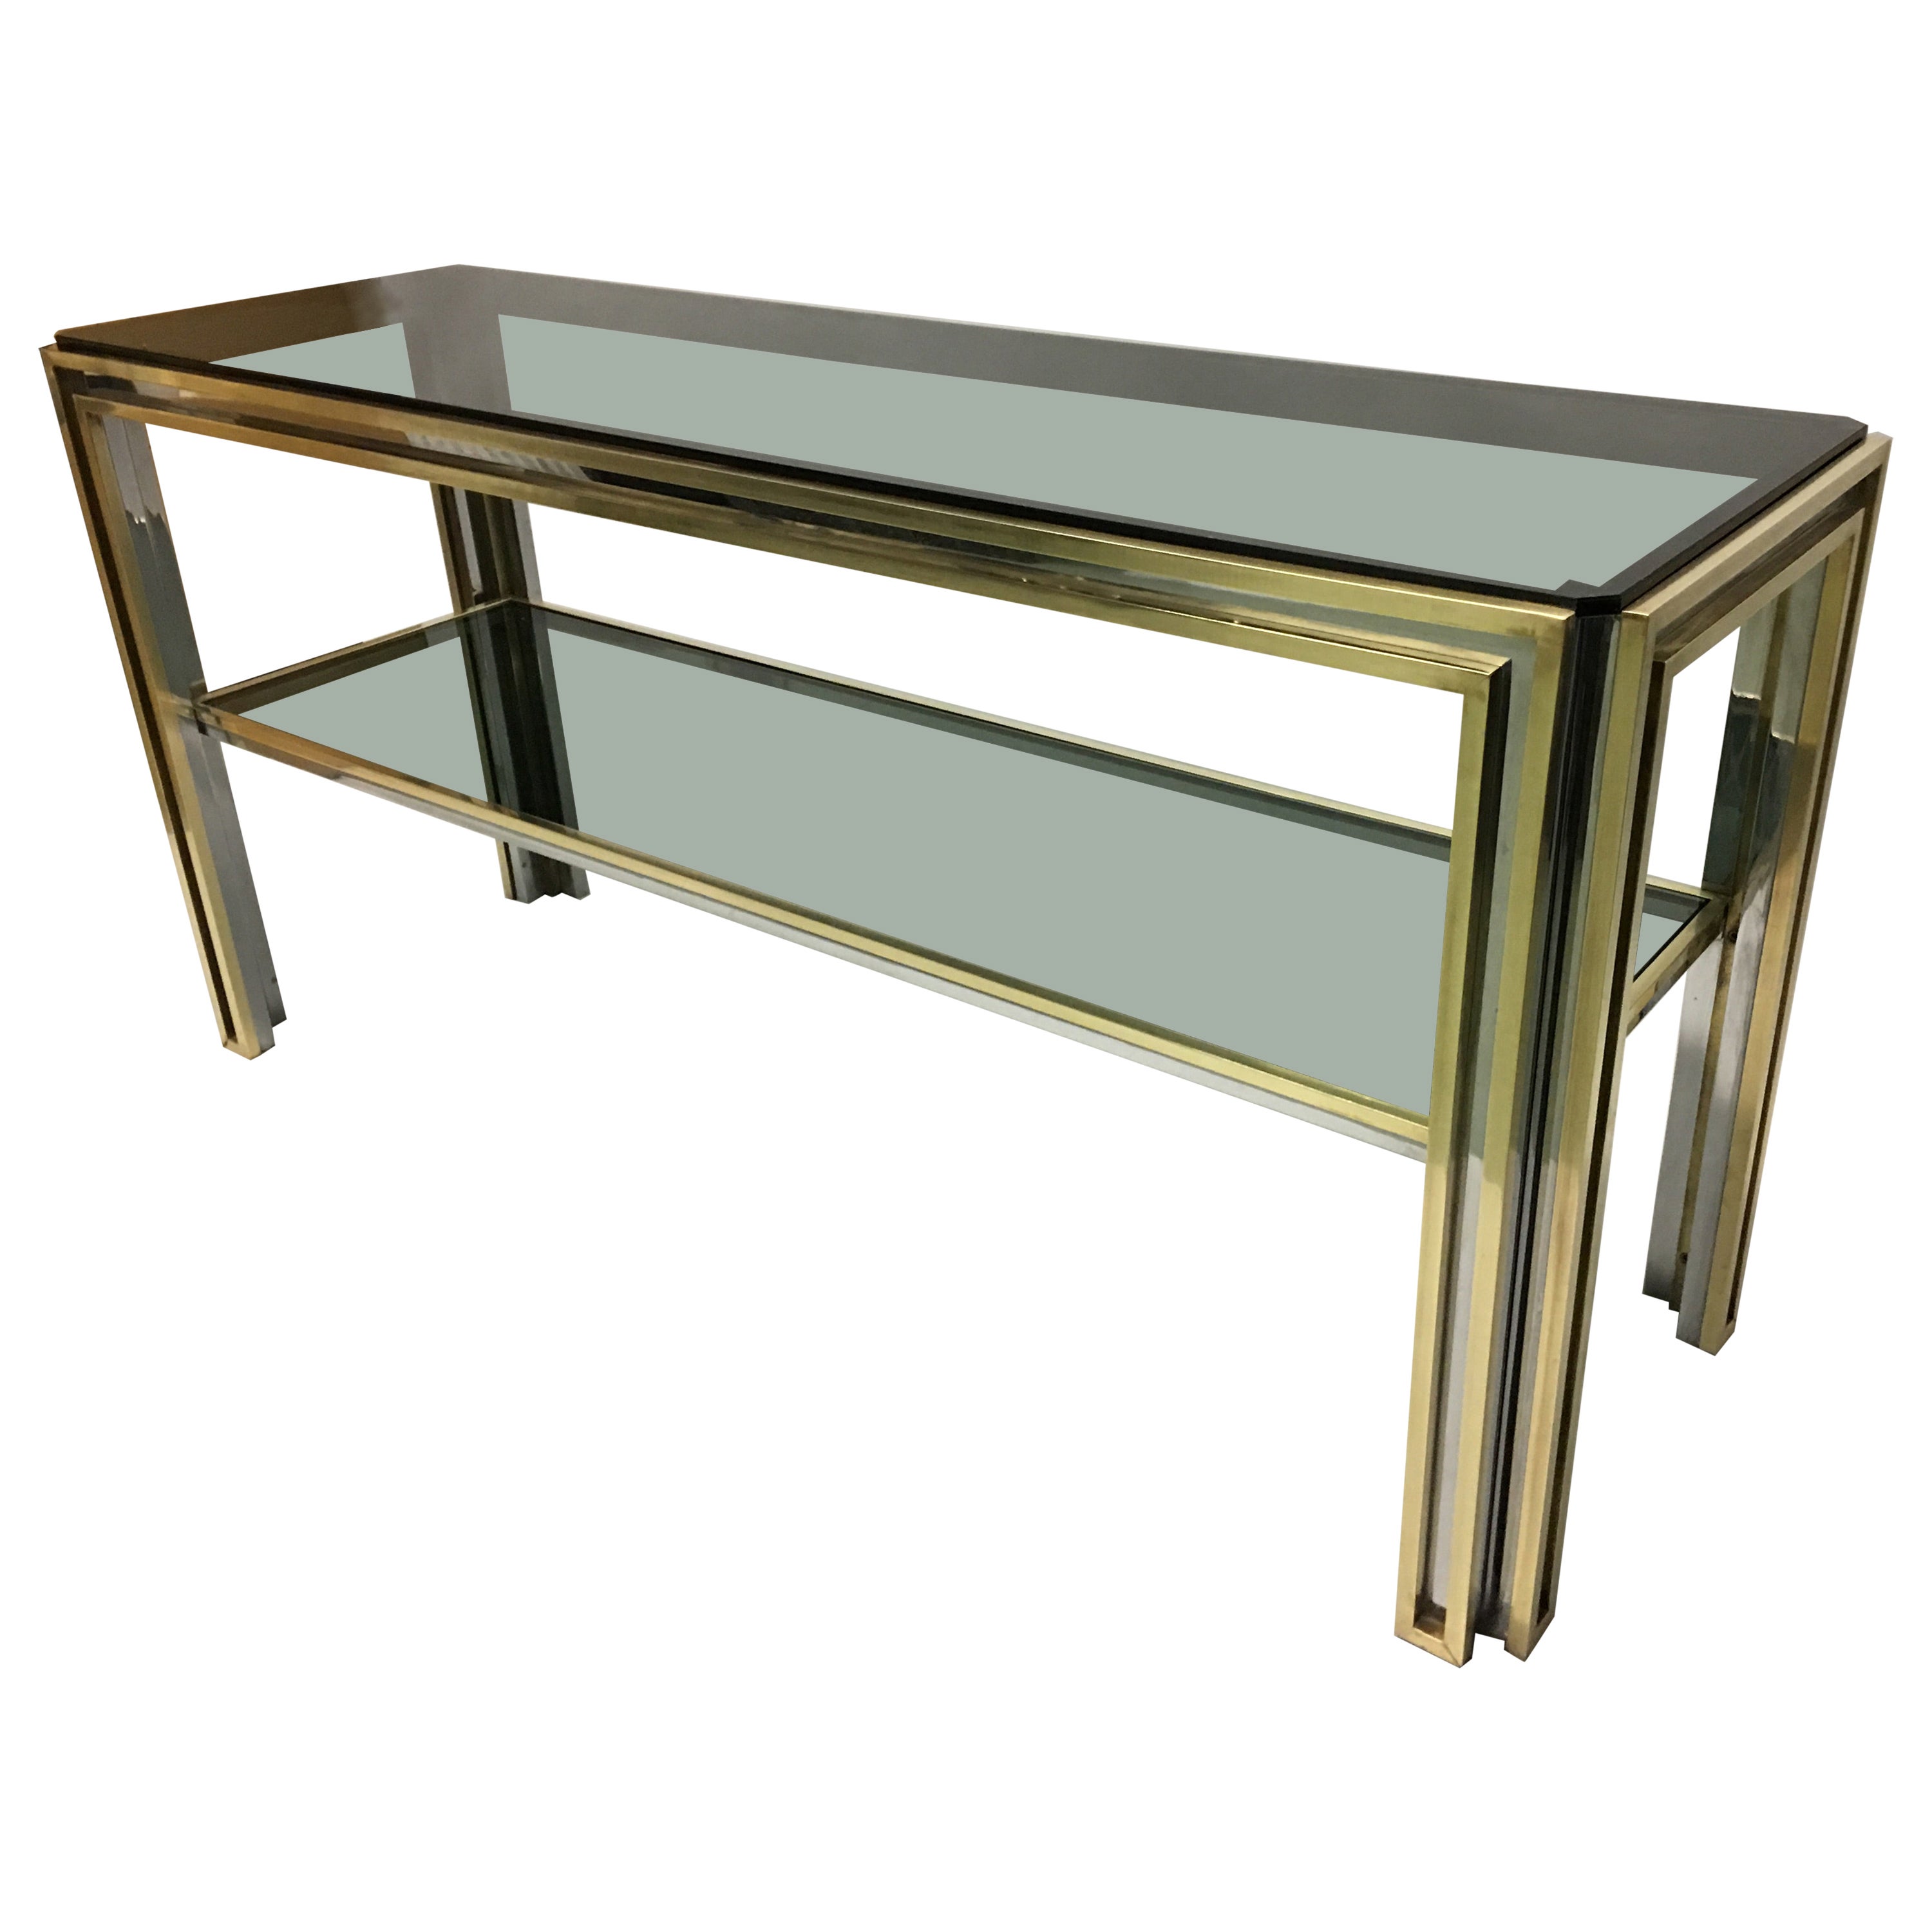 Italian Mid-Century Modern Brass and Chrome Console / Sofa Table by Willy Rizzo For Sale